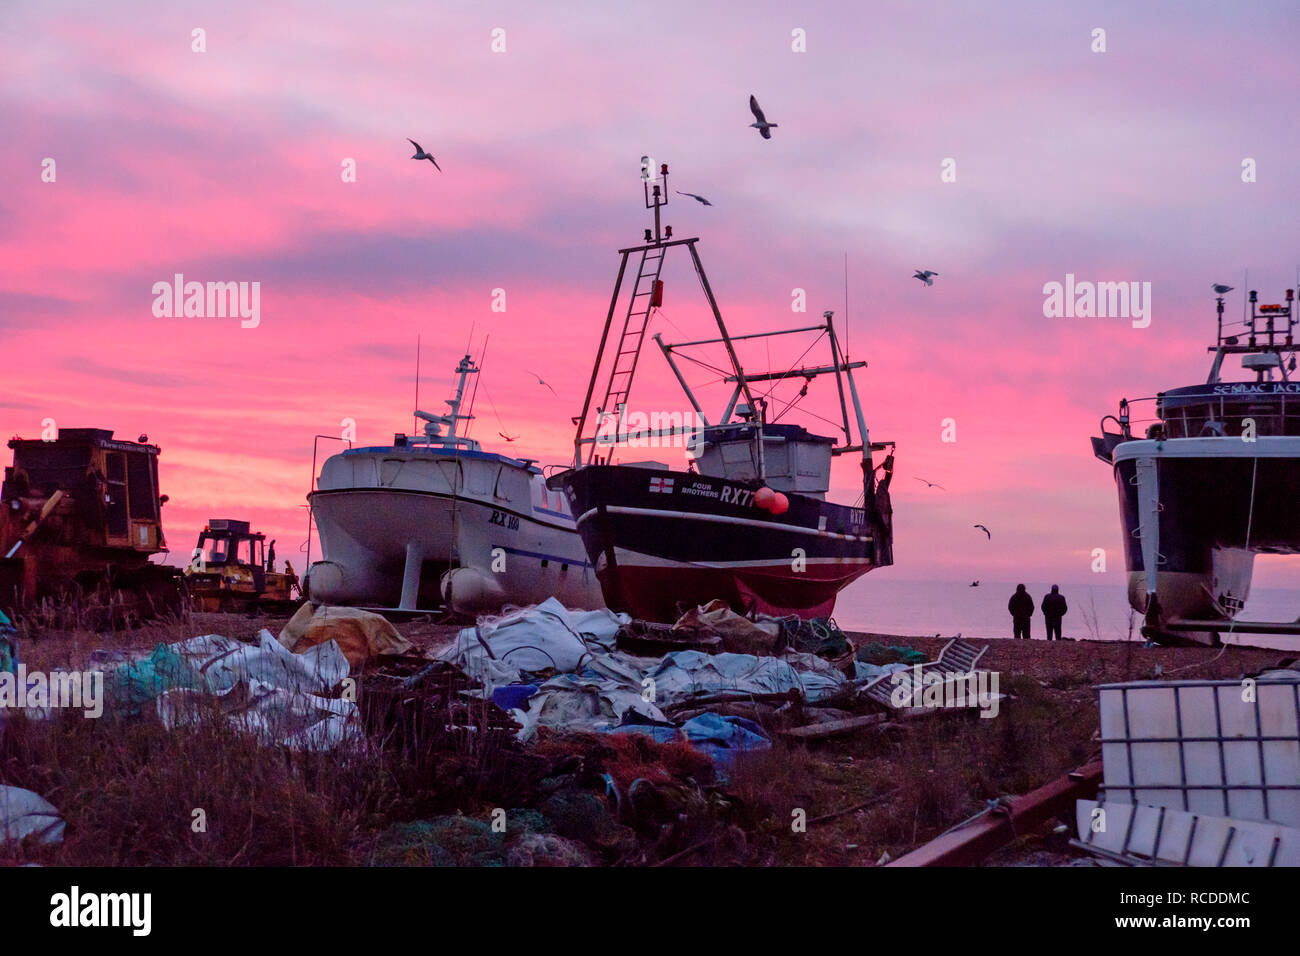 Hastings, East Sussex: Colourful dawn on the Stade fishermen's beach. Hastings has the largest beach-launched fishing fleet in Europe. 27th Dec 2018 Stock Photo